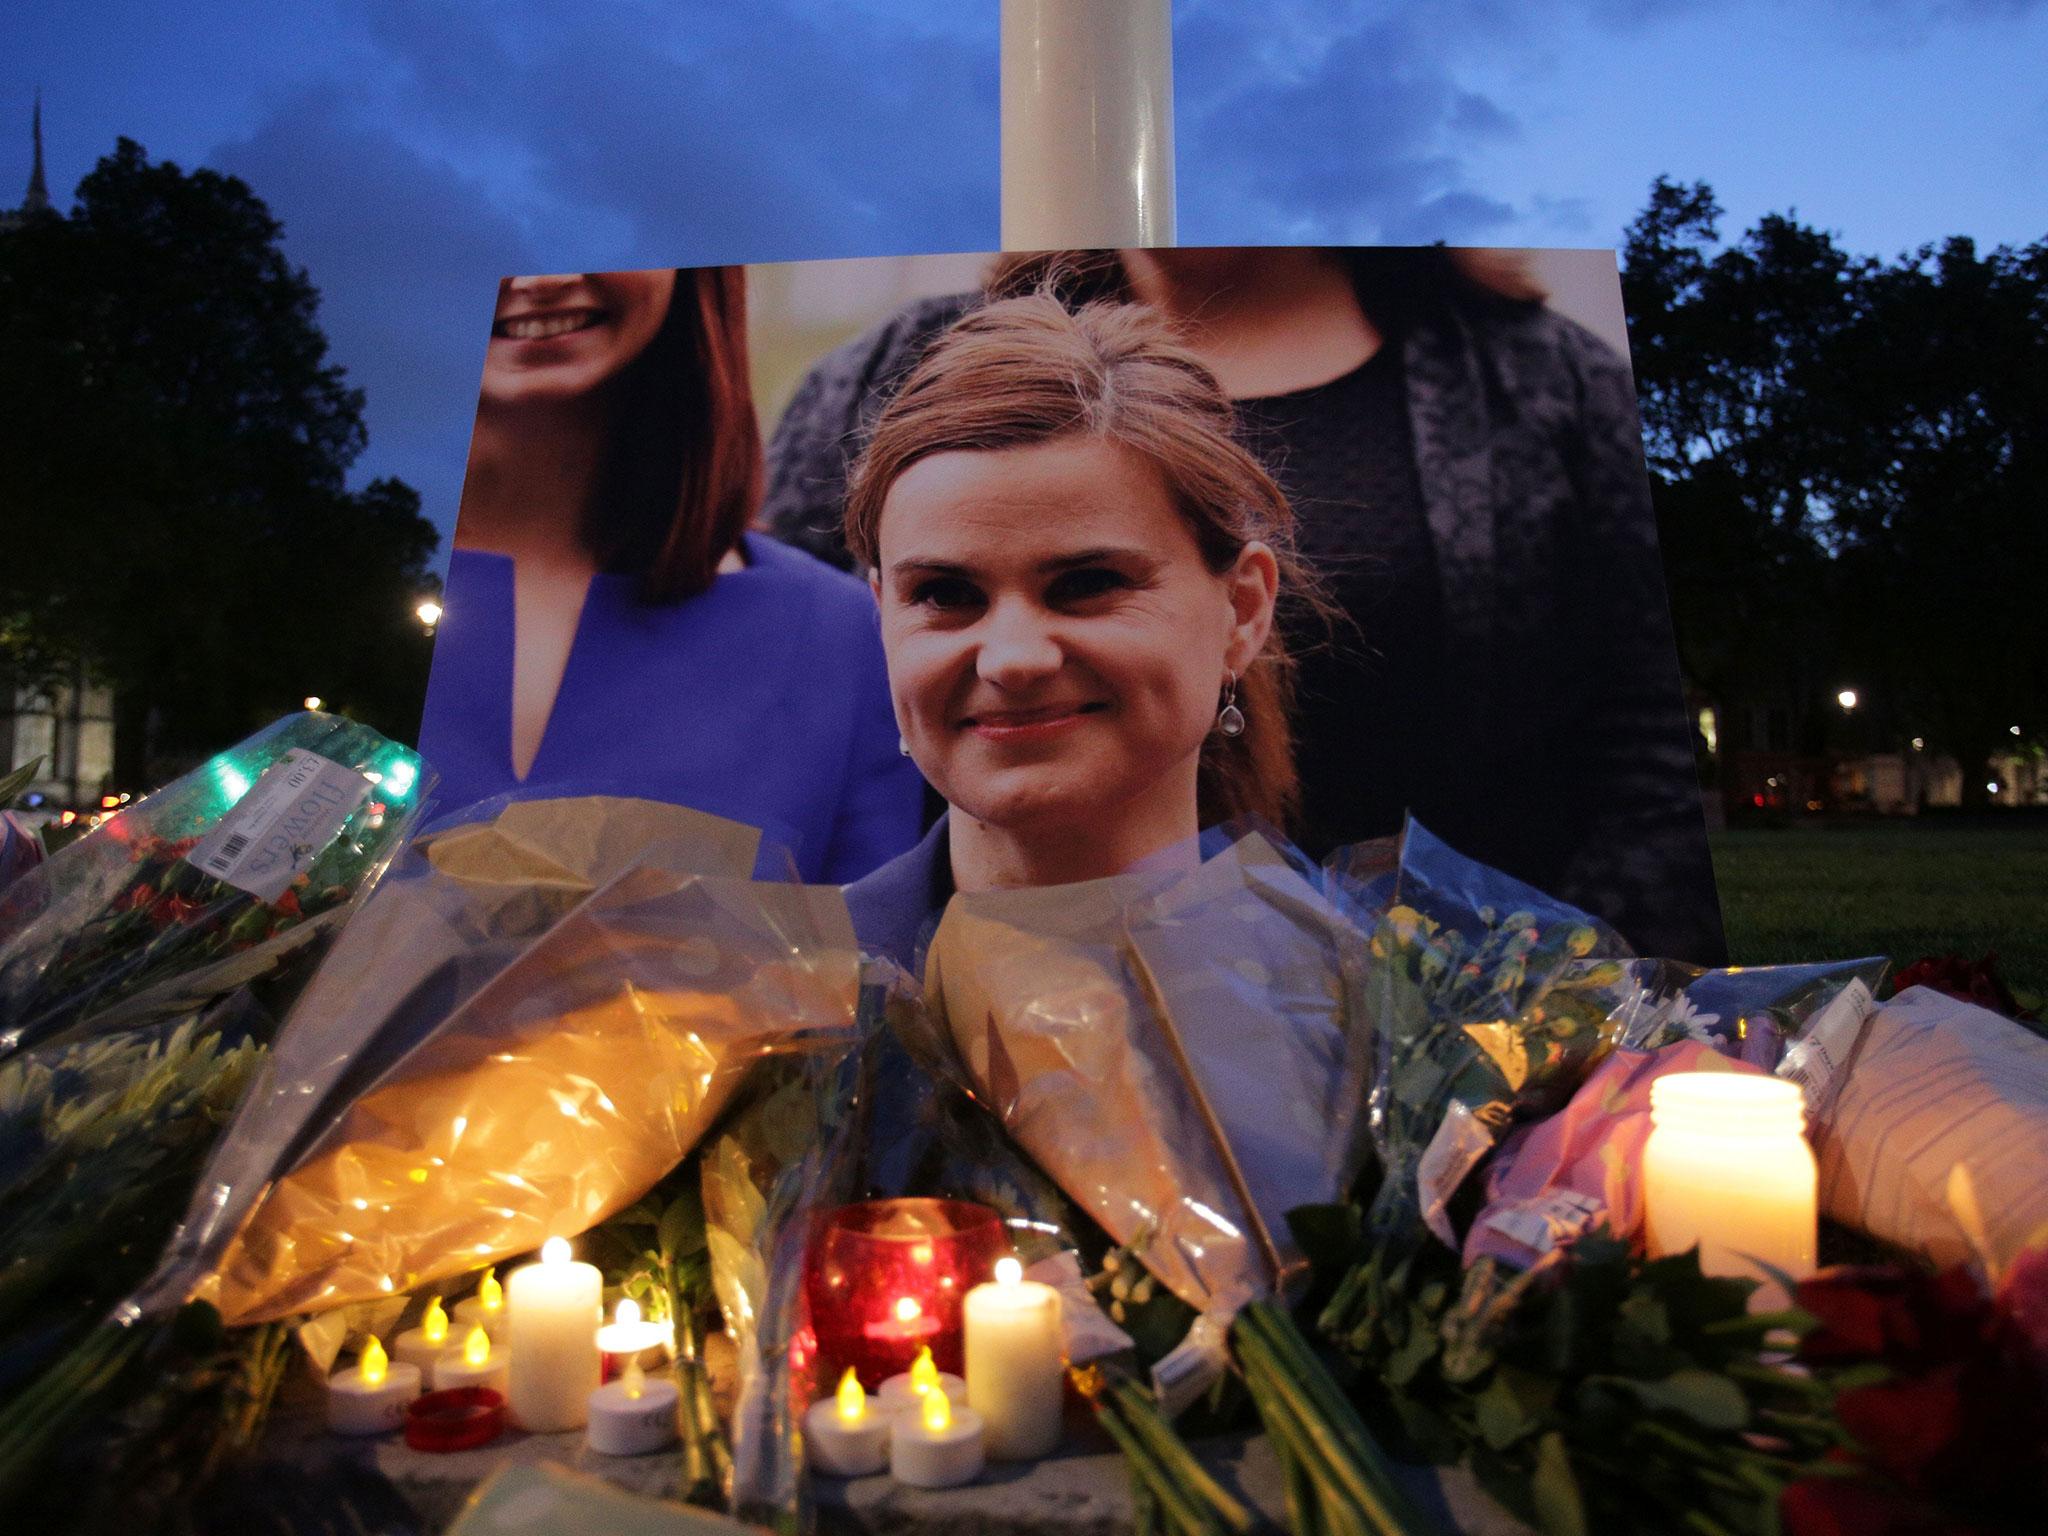 Floral tributes and candles are placed by a picture of slain Labour MP Jo Cox at a vigil in Parliament square in London on 16 June, 2016